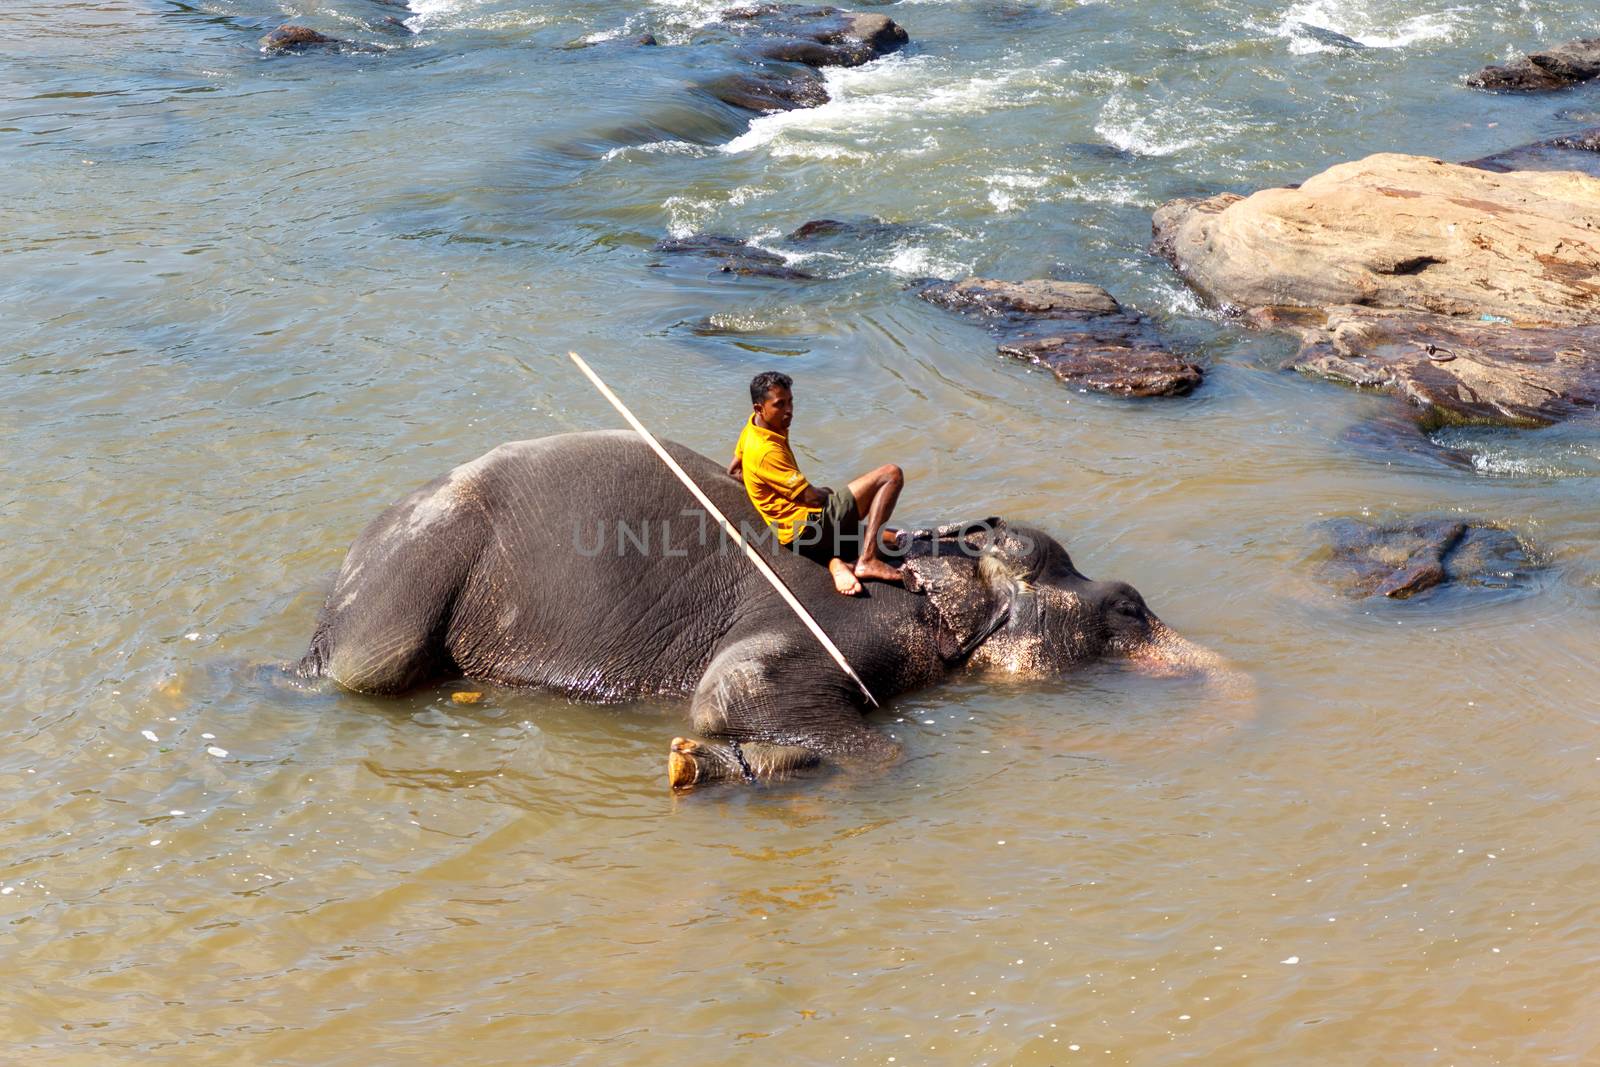 SRI LANKA - Circa 2014: Man taking a rest on an elephant that is laying on water to coll down from the extreme heat wave. by dugulan